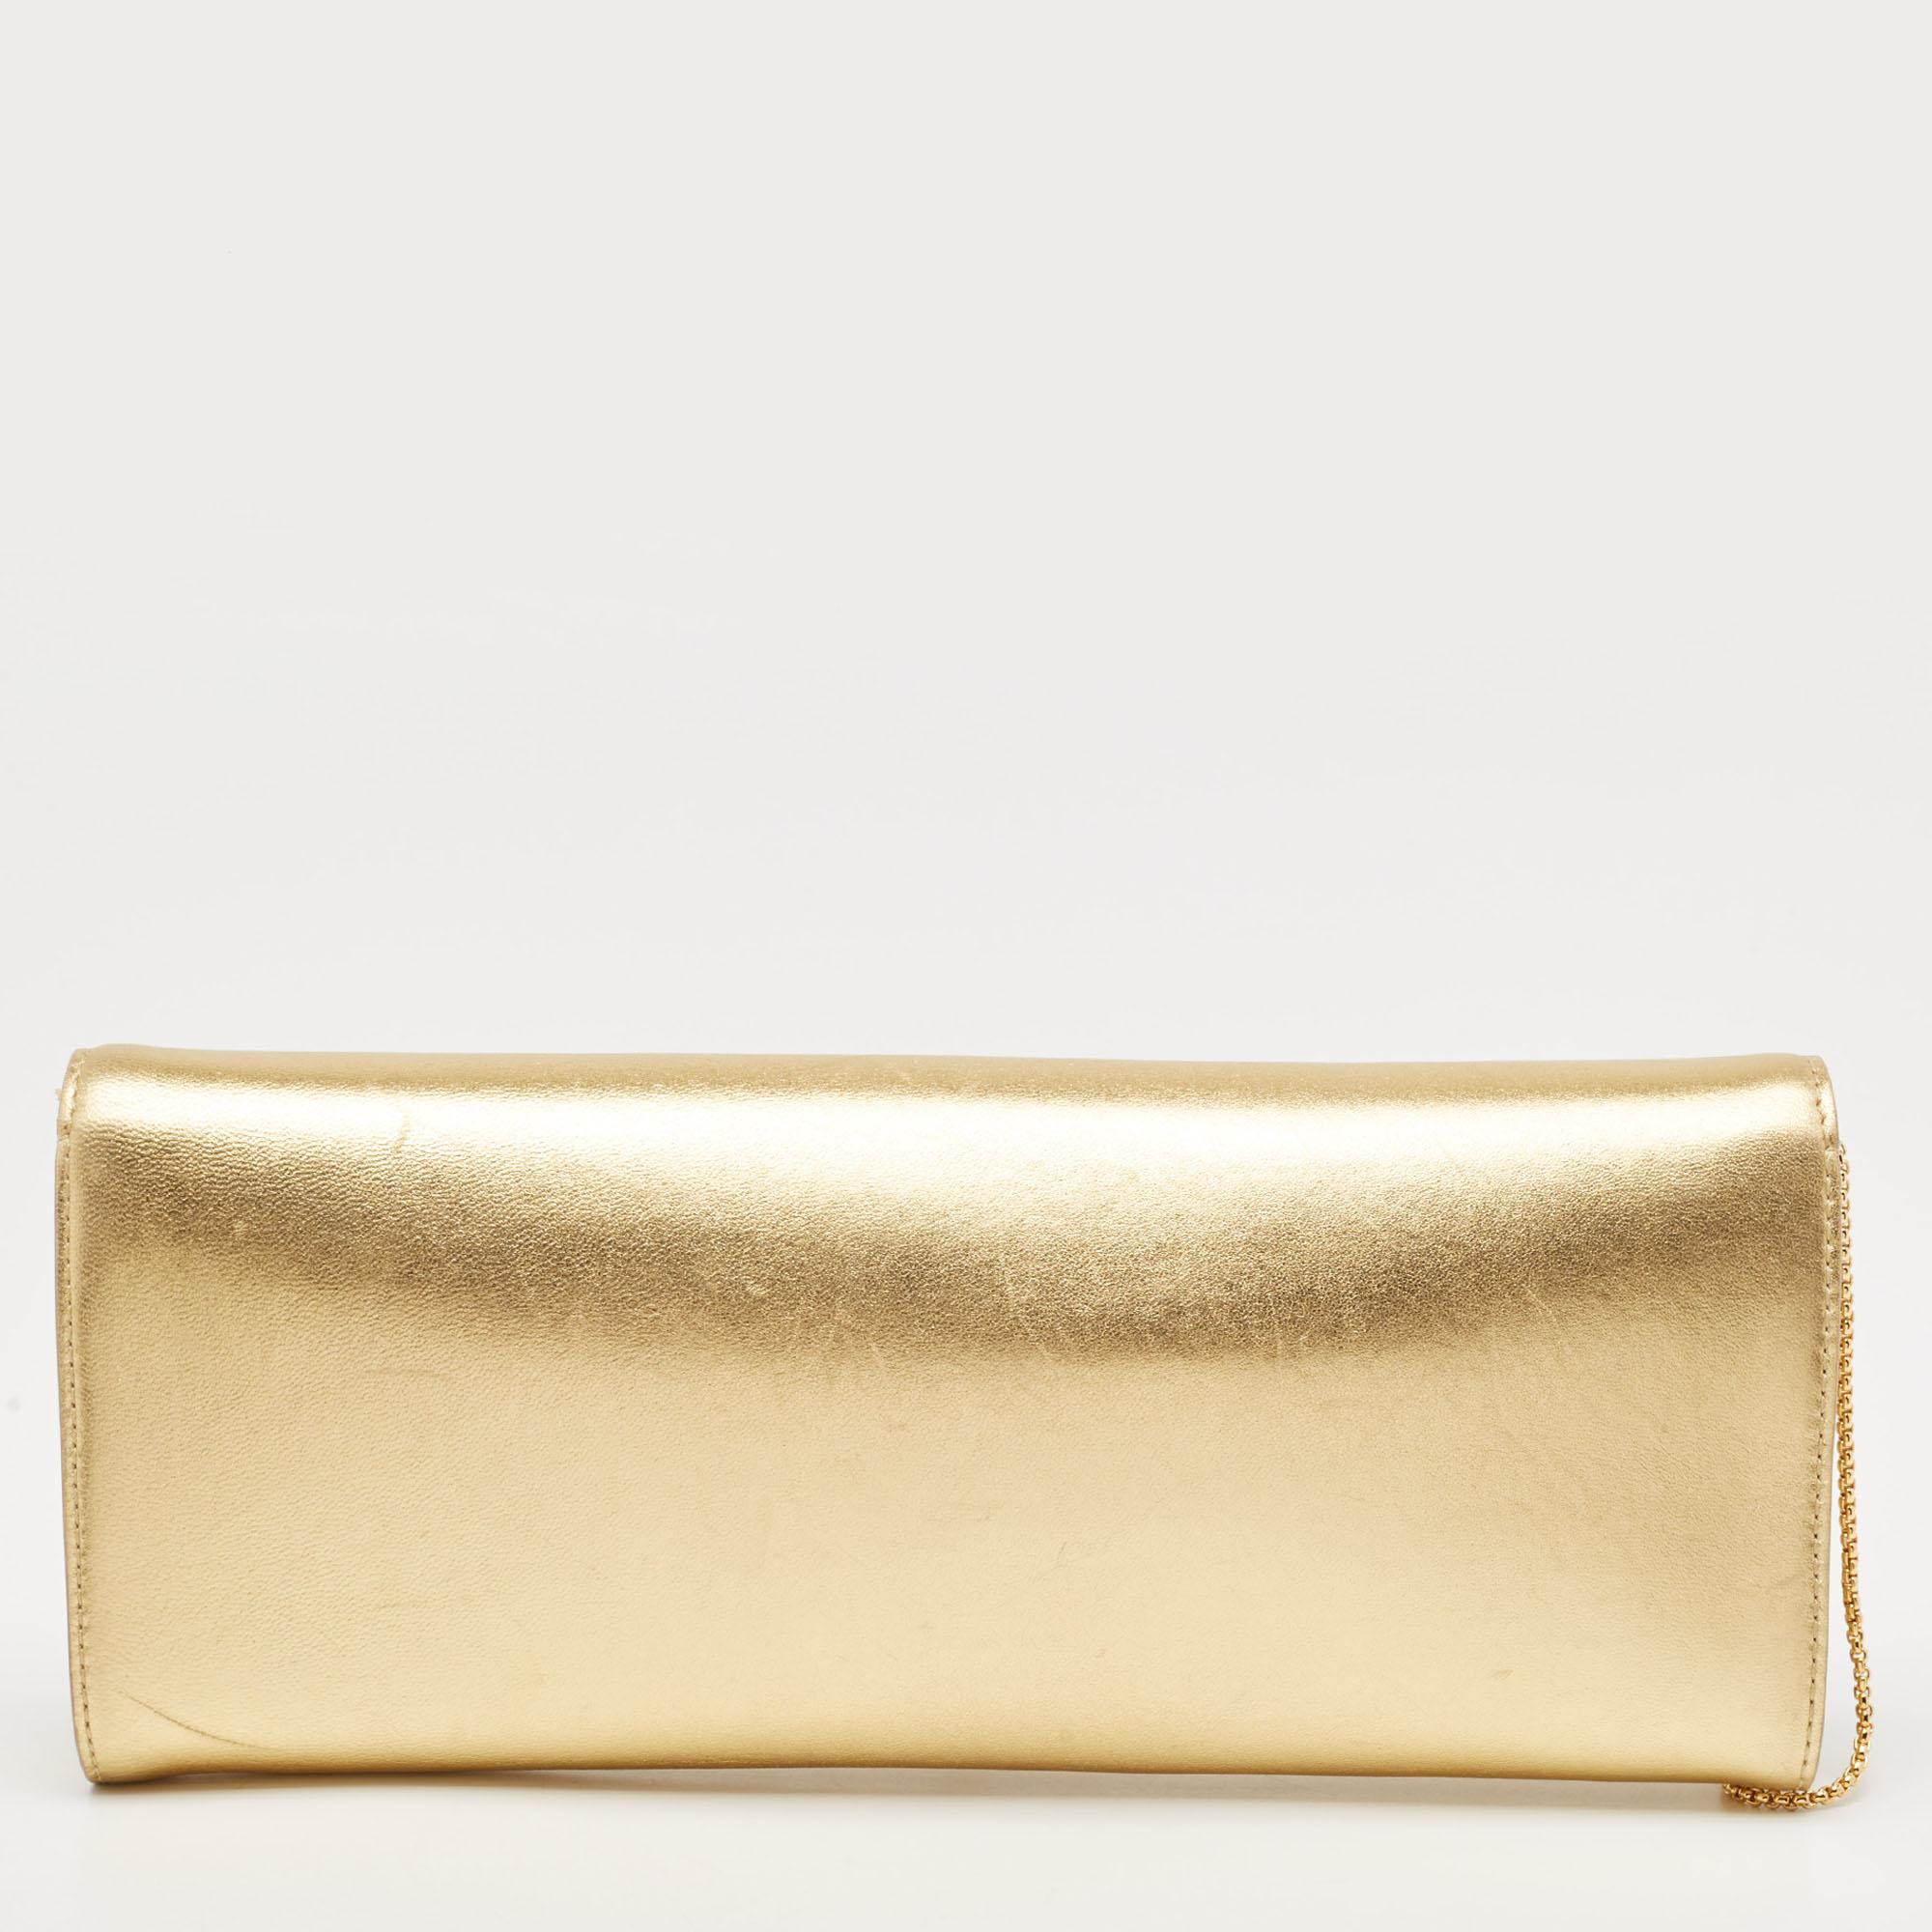 Functional and fashionable, this clutch is a classy styling choice. It is crafted from quality materials, and its lined interior will keep your evening essentials in a neat way.

Includes: Info Booklet, Brand Tag, Detachable Chain Strap

